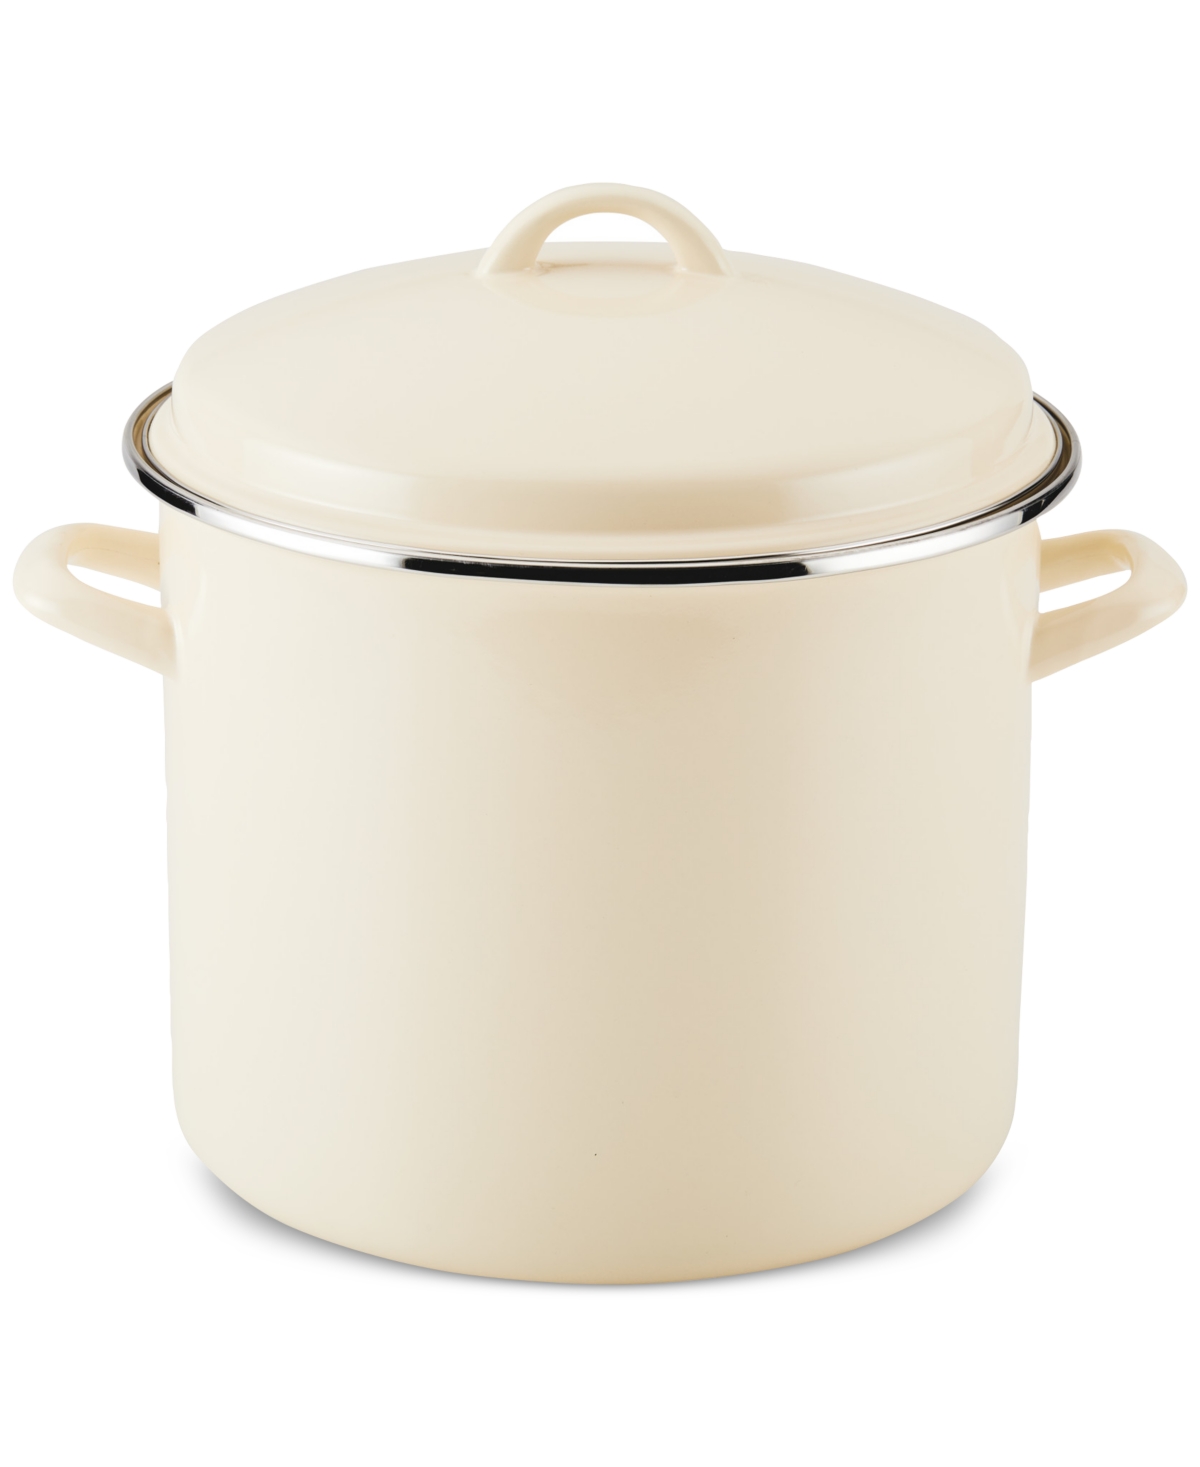 Rachael Ray Enamel On Steel 12-qt. Covered Stockpot In Neutral